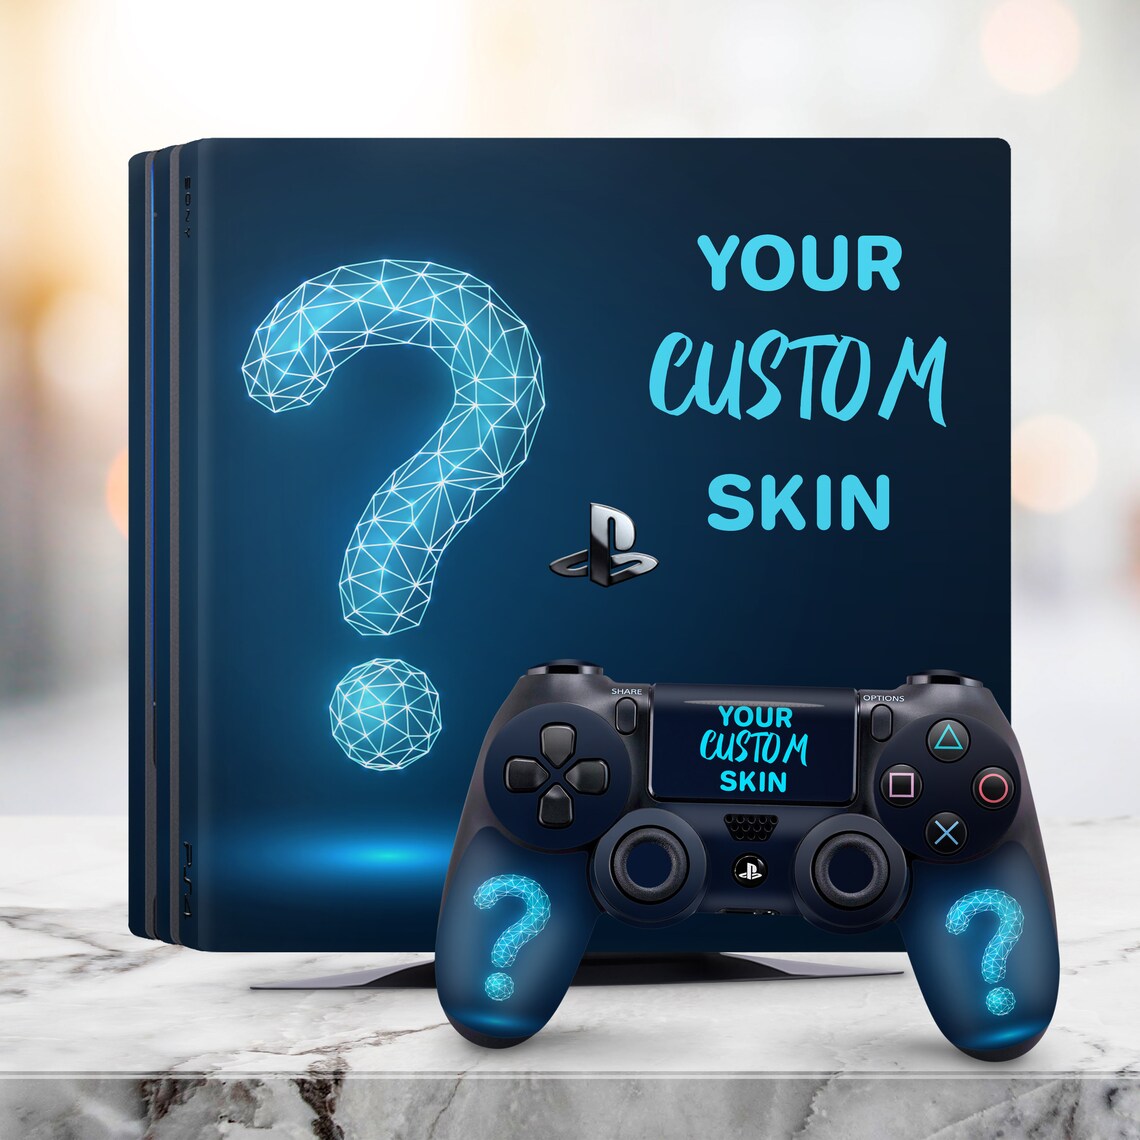 Customize your PS4 with our vibrant, easy-to-apply Protector Skin! Available for PS4, PS4 Slim, and PS4 Pro. Personalize with any design